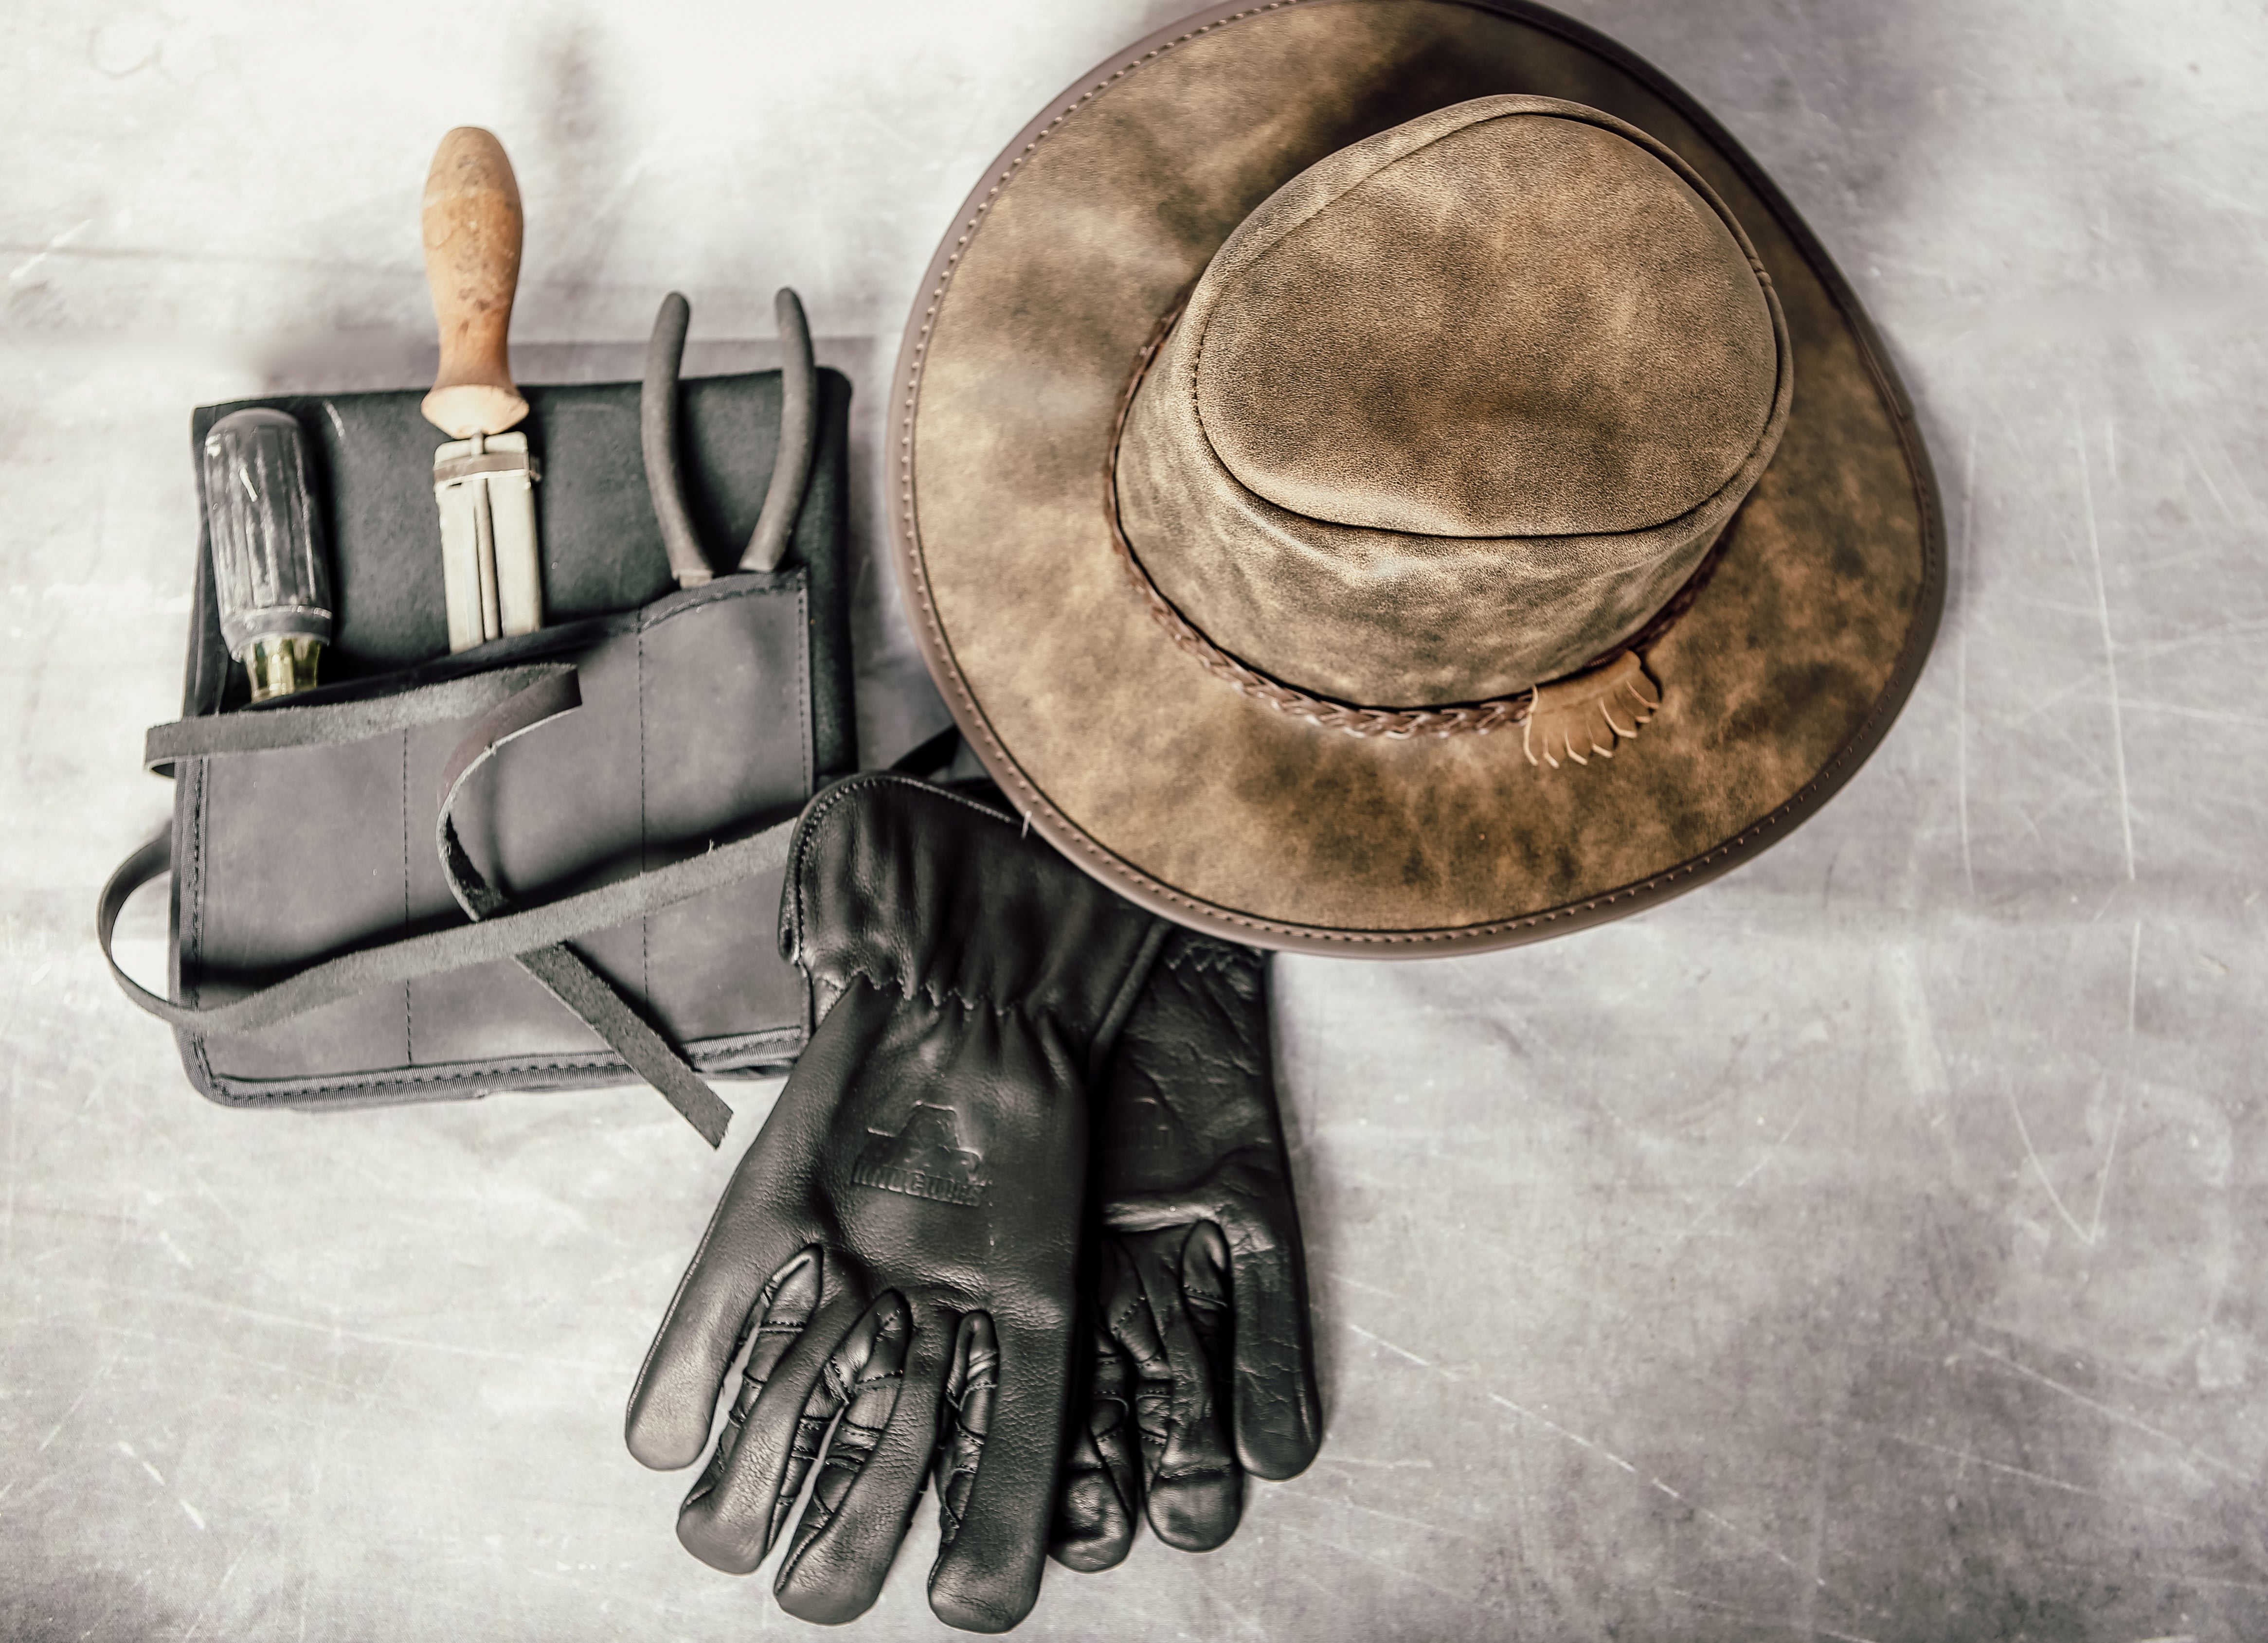 A brown cowboy hat together with 1 pair of black gloves and a tool wrap with tools